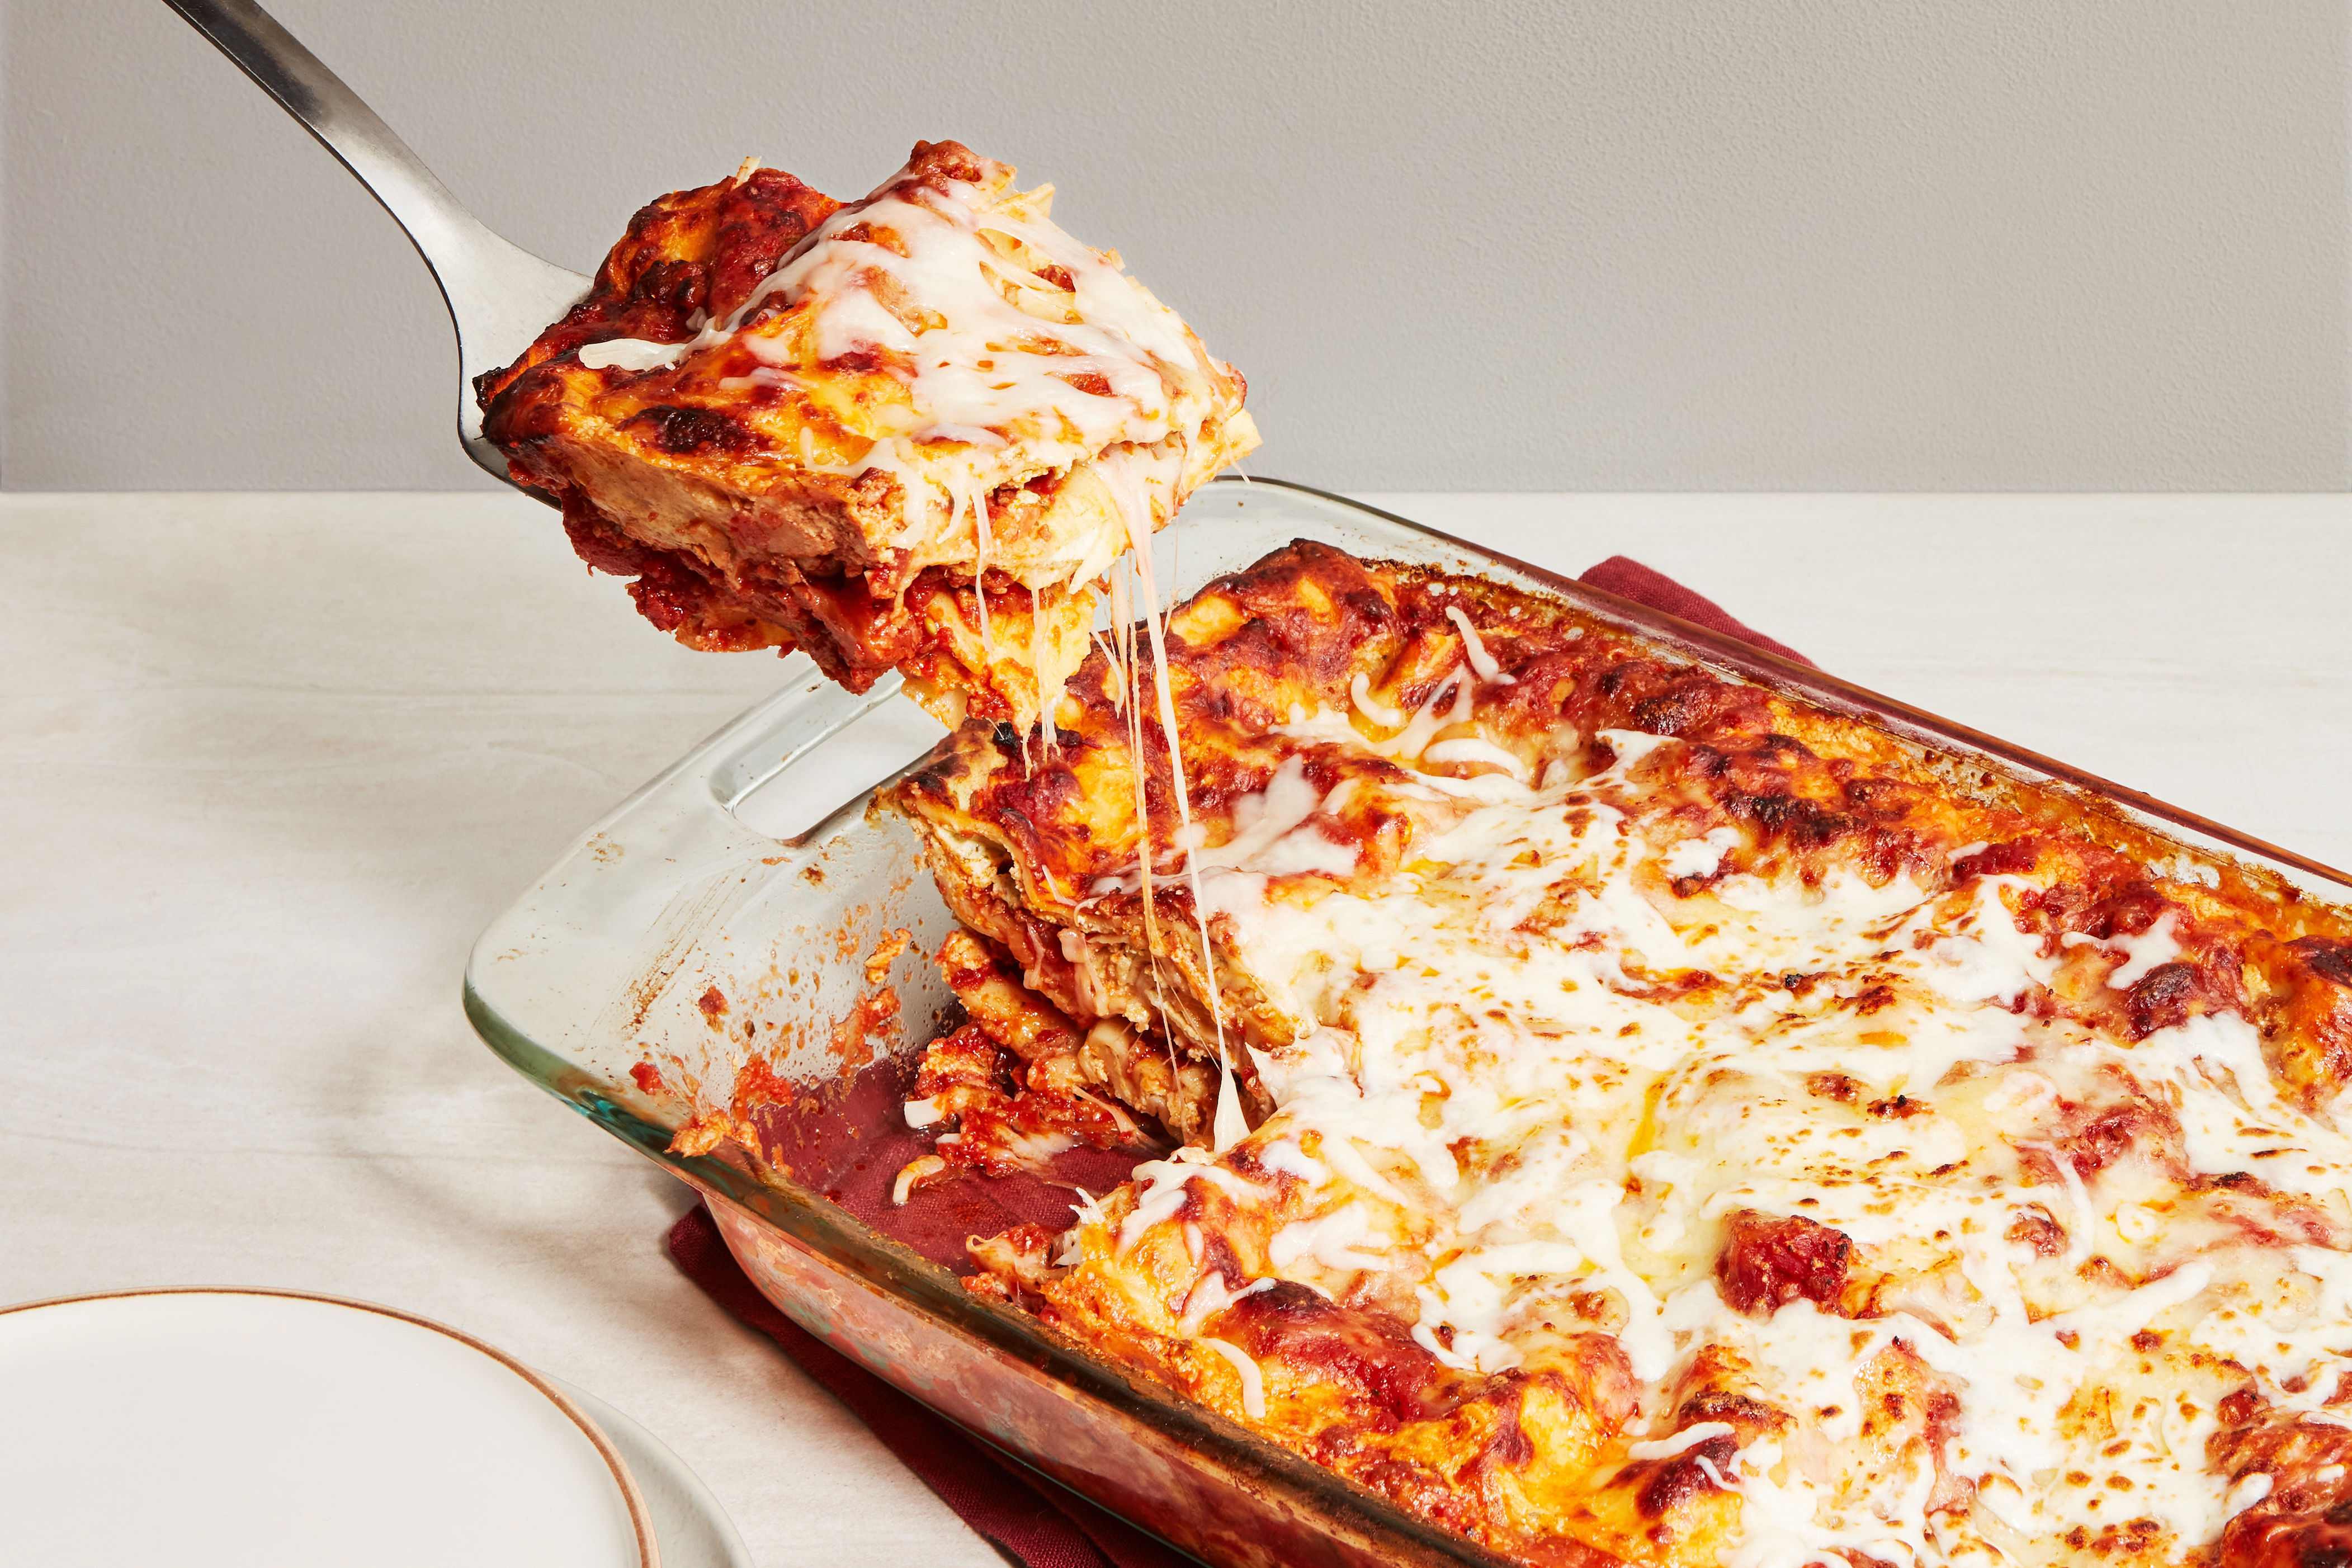 43 Winter Dinner Ideas to Warm You Through the Cold